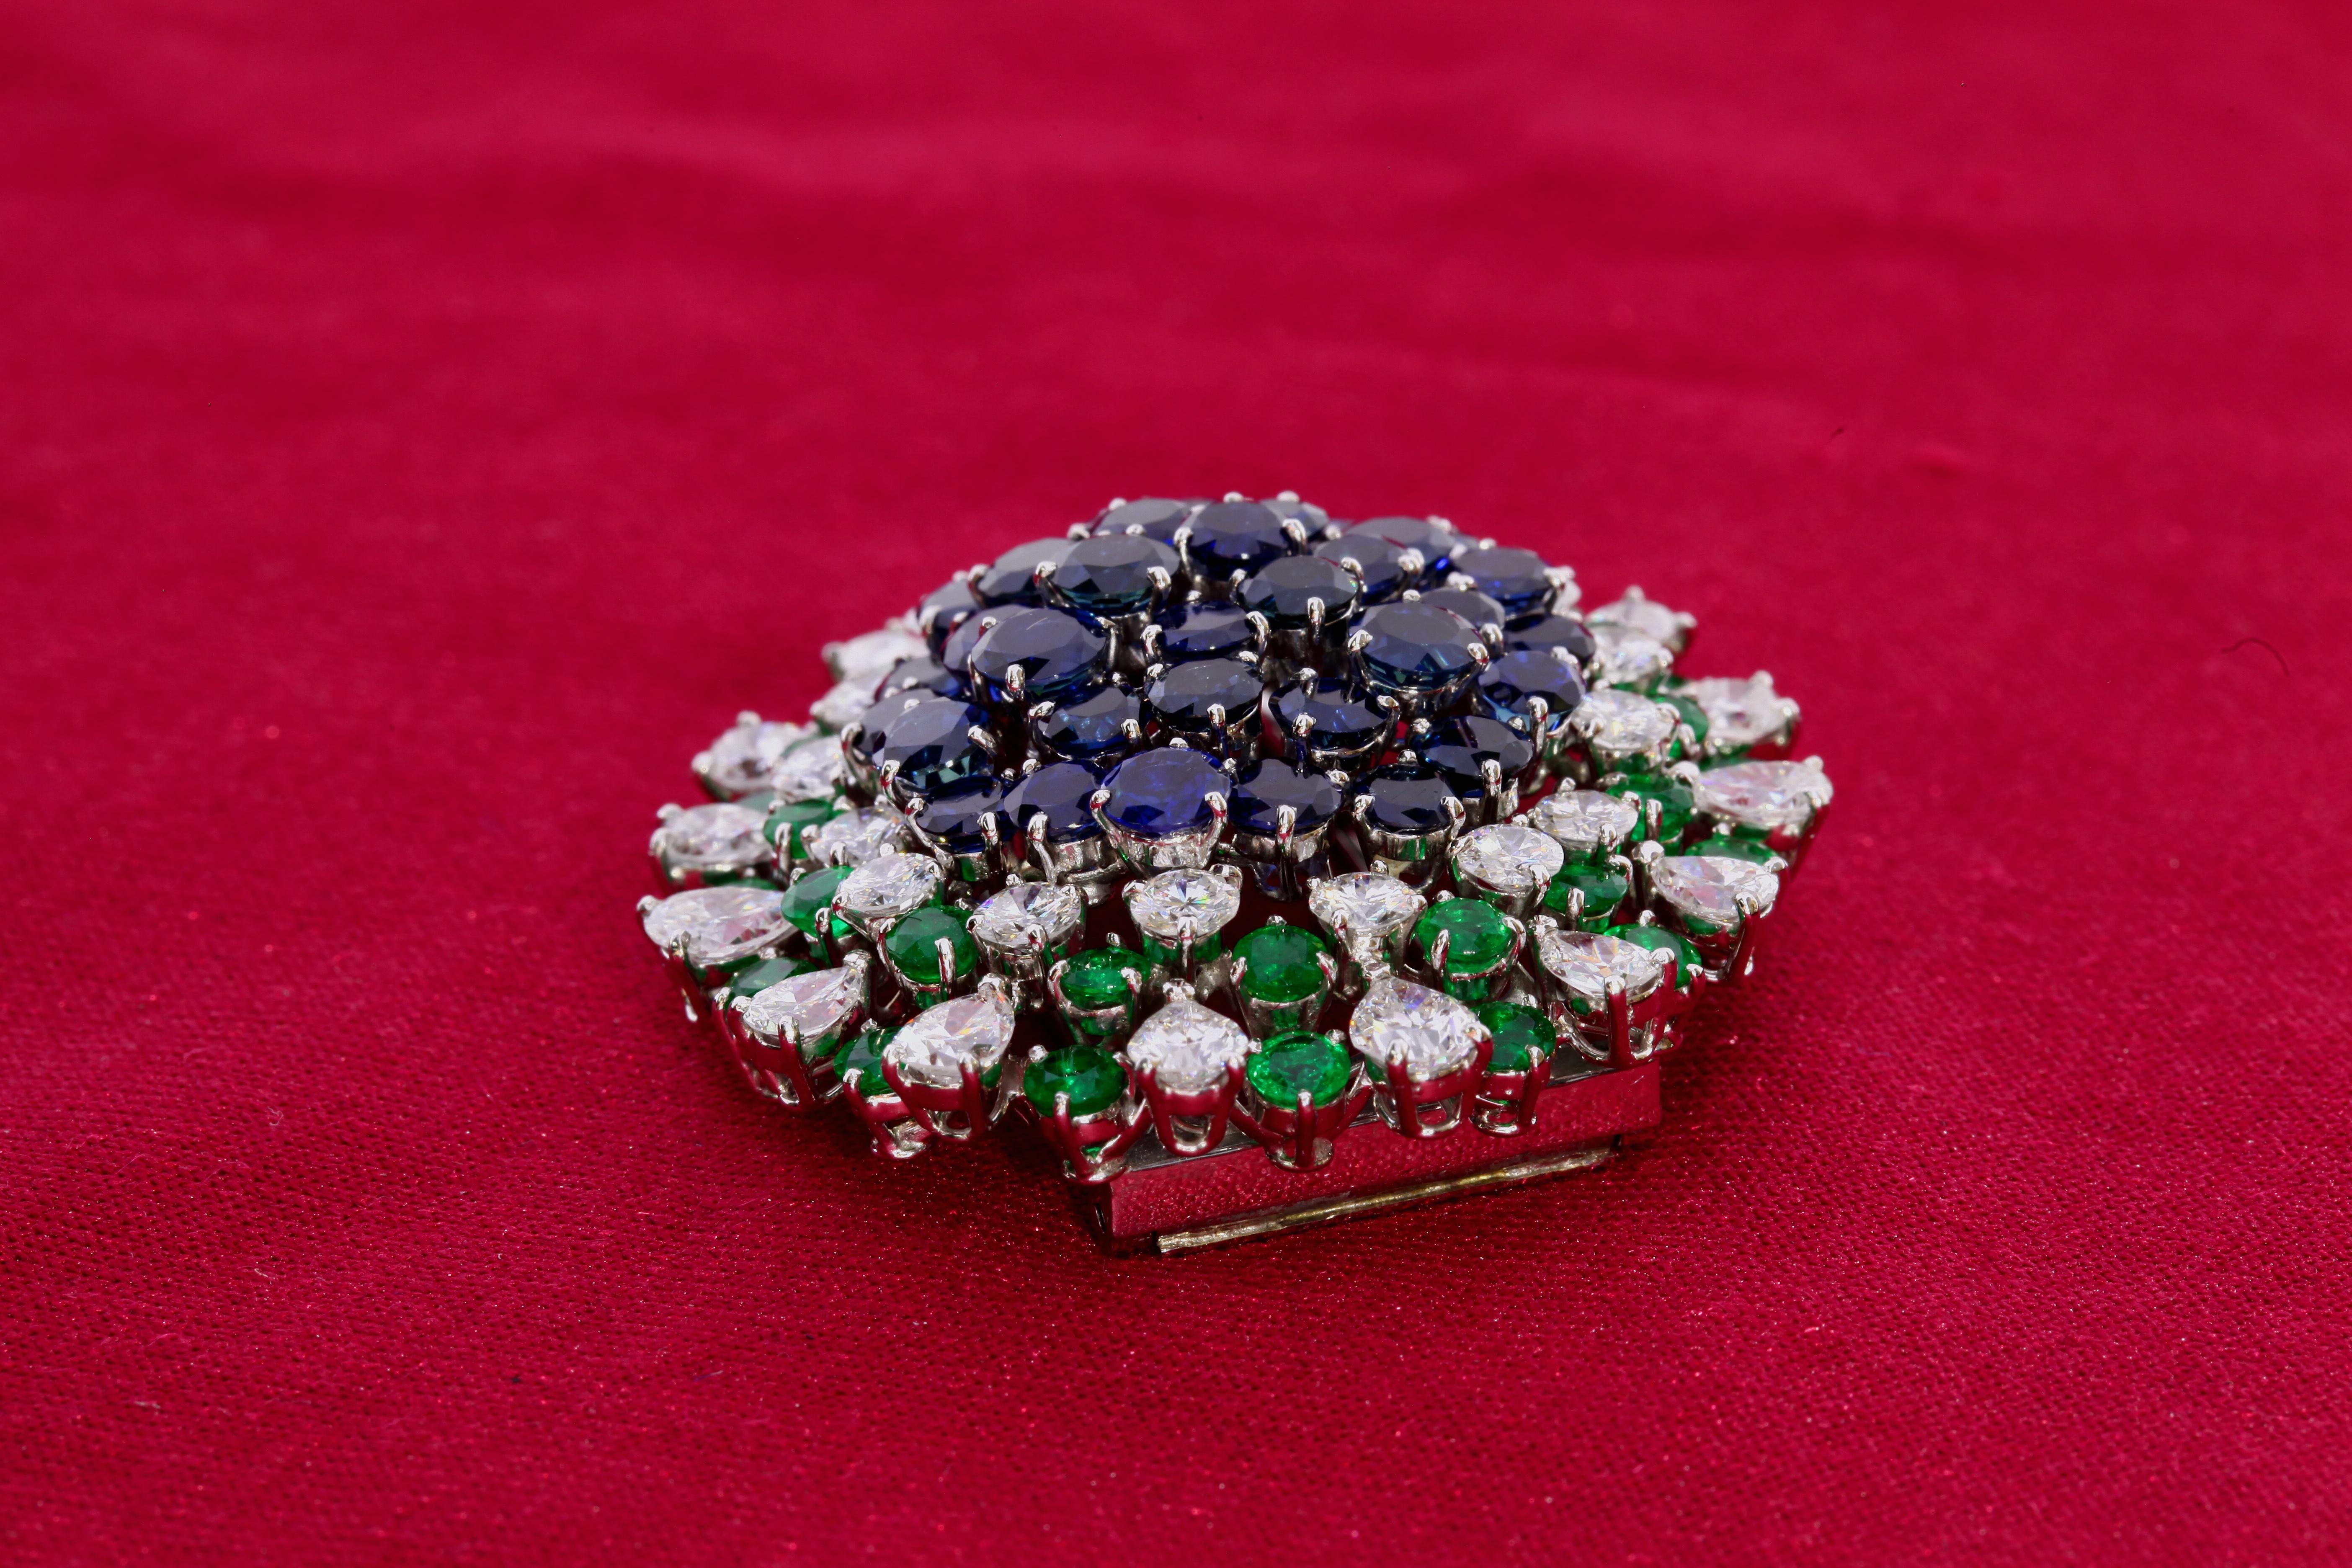 This brooch containing 35 sapphires, 32 emeralds, and 32 diamonds in a flower design. The brooch measure approximately 42mm in diameter. 